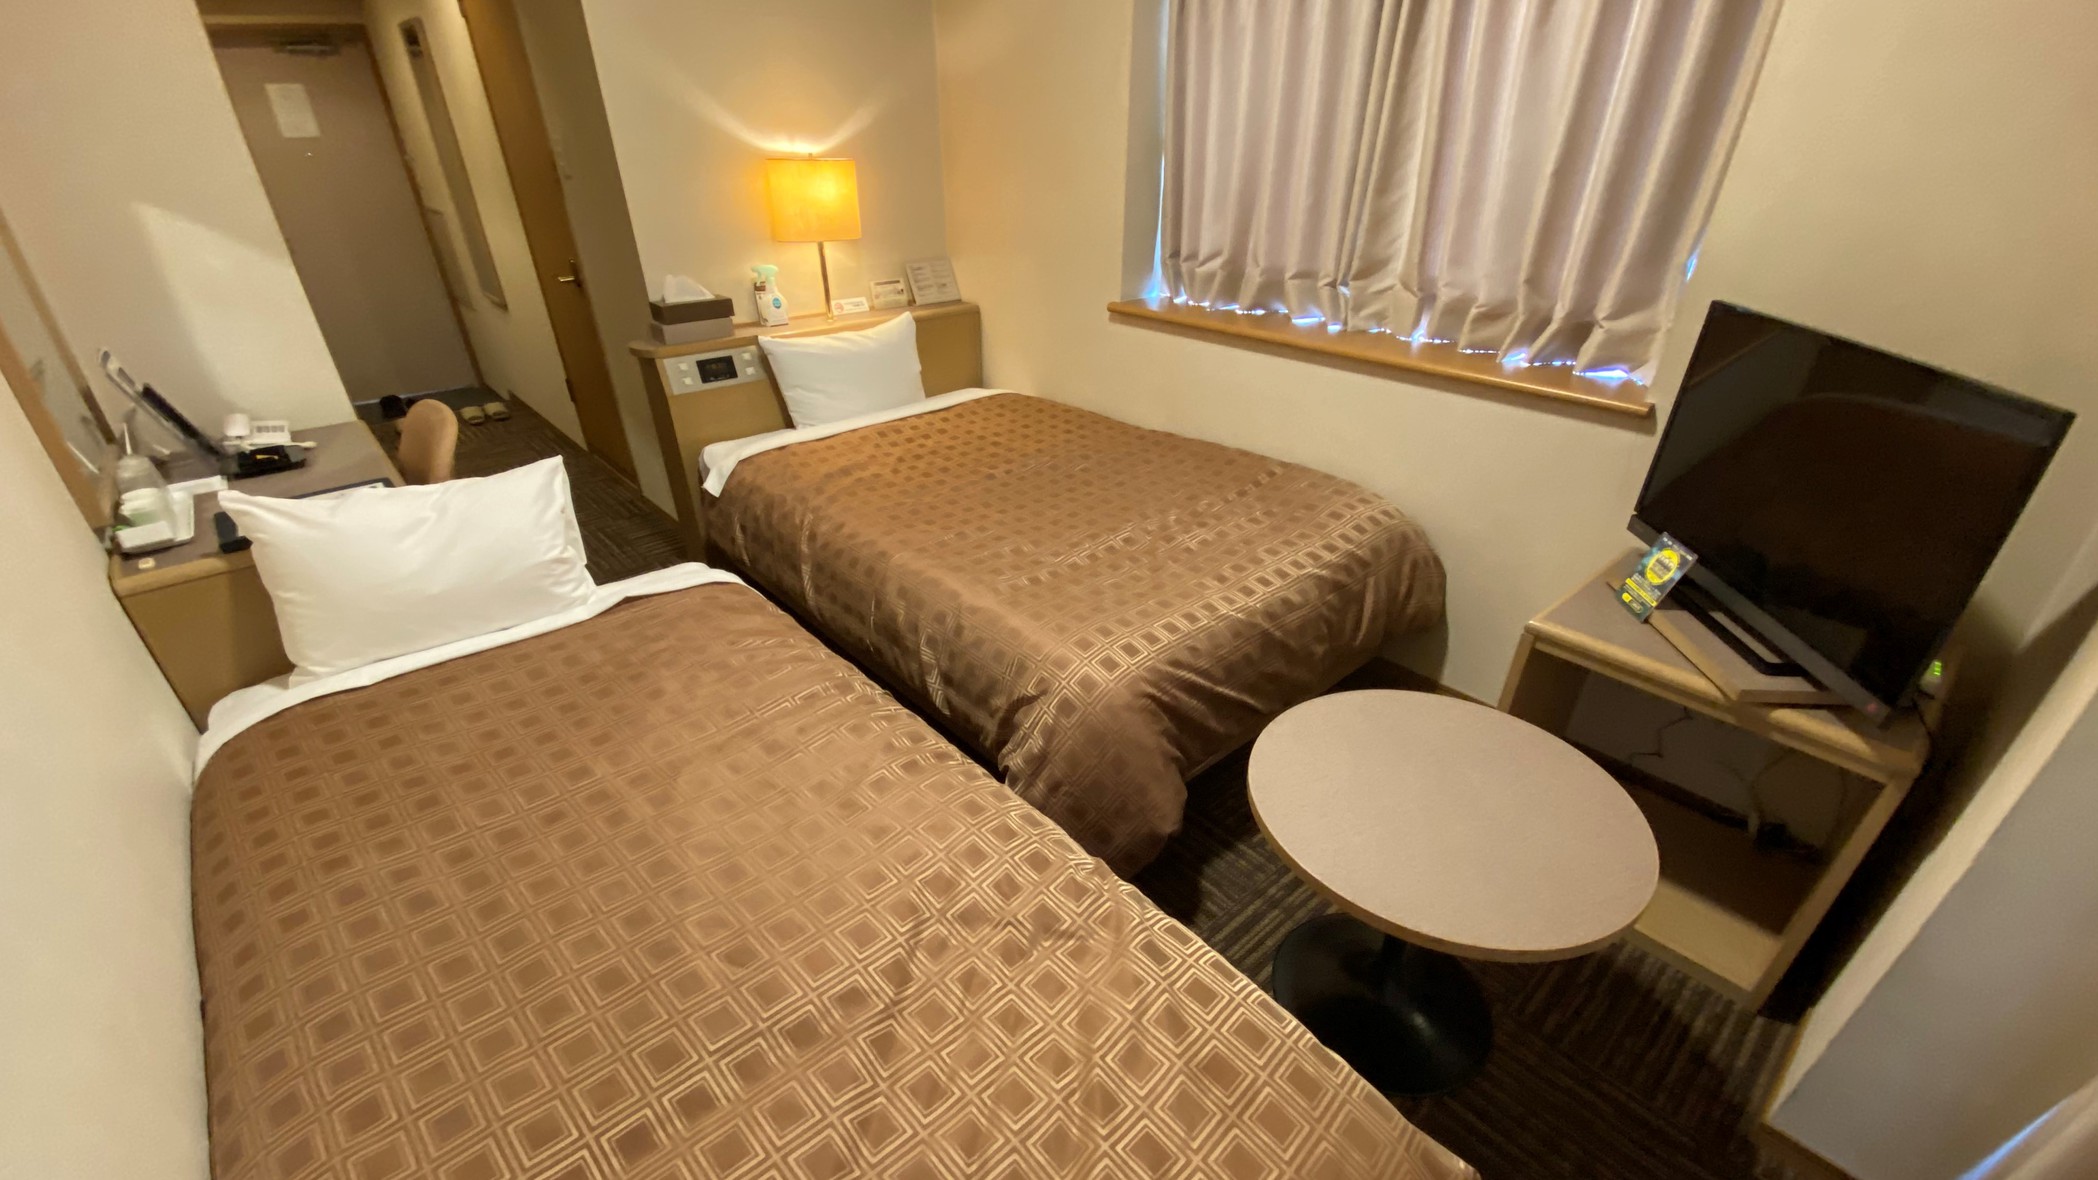 Ryugasaki Plaza Hotel Honkan The 3-star Ryugasaki Plaza Hotel Honkan offers comfort and convenience whether youre on business or holiday in Ryugasaki. Both business travelers and tourists can enjoy the propertys facilities and 